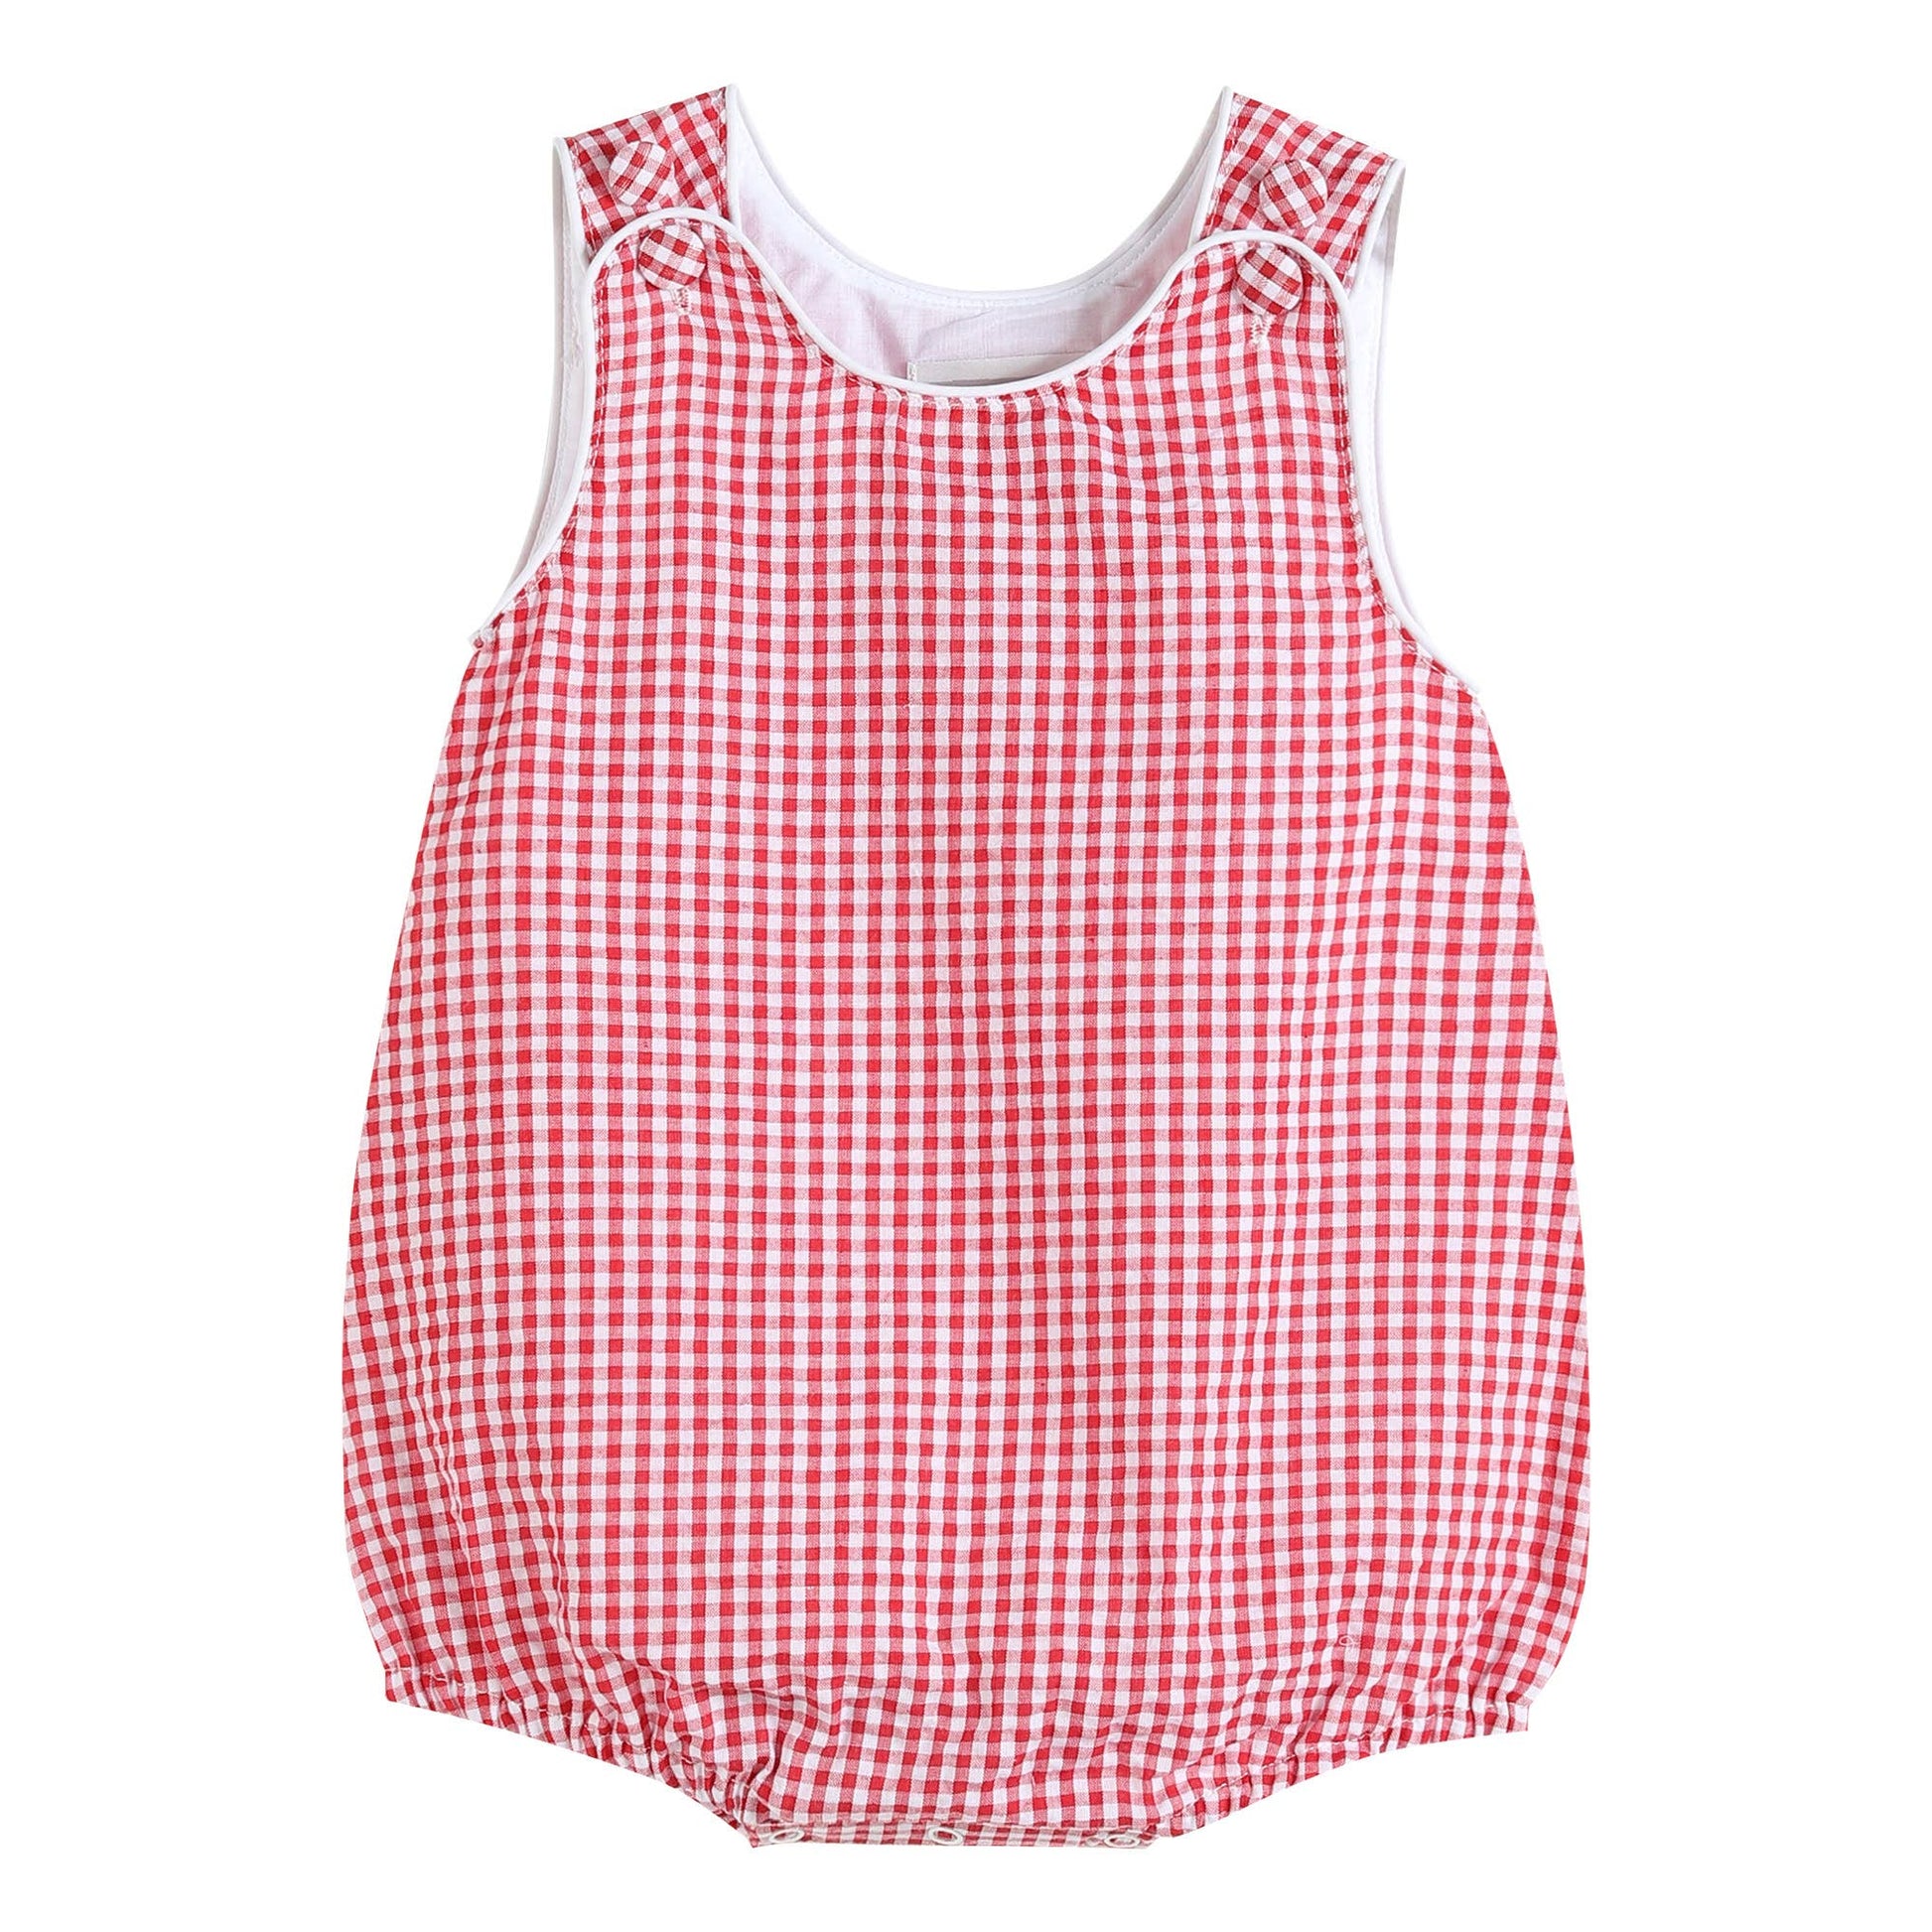 A Lil Cactus Classic Red Seersucker Baby Bubble Romper with a red and white checkered pattern.